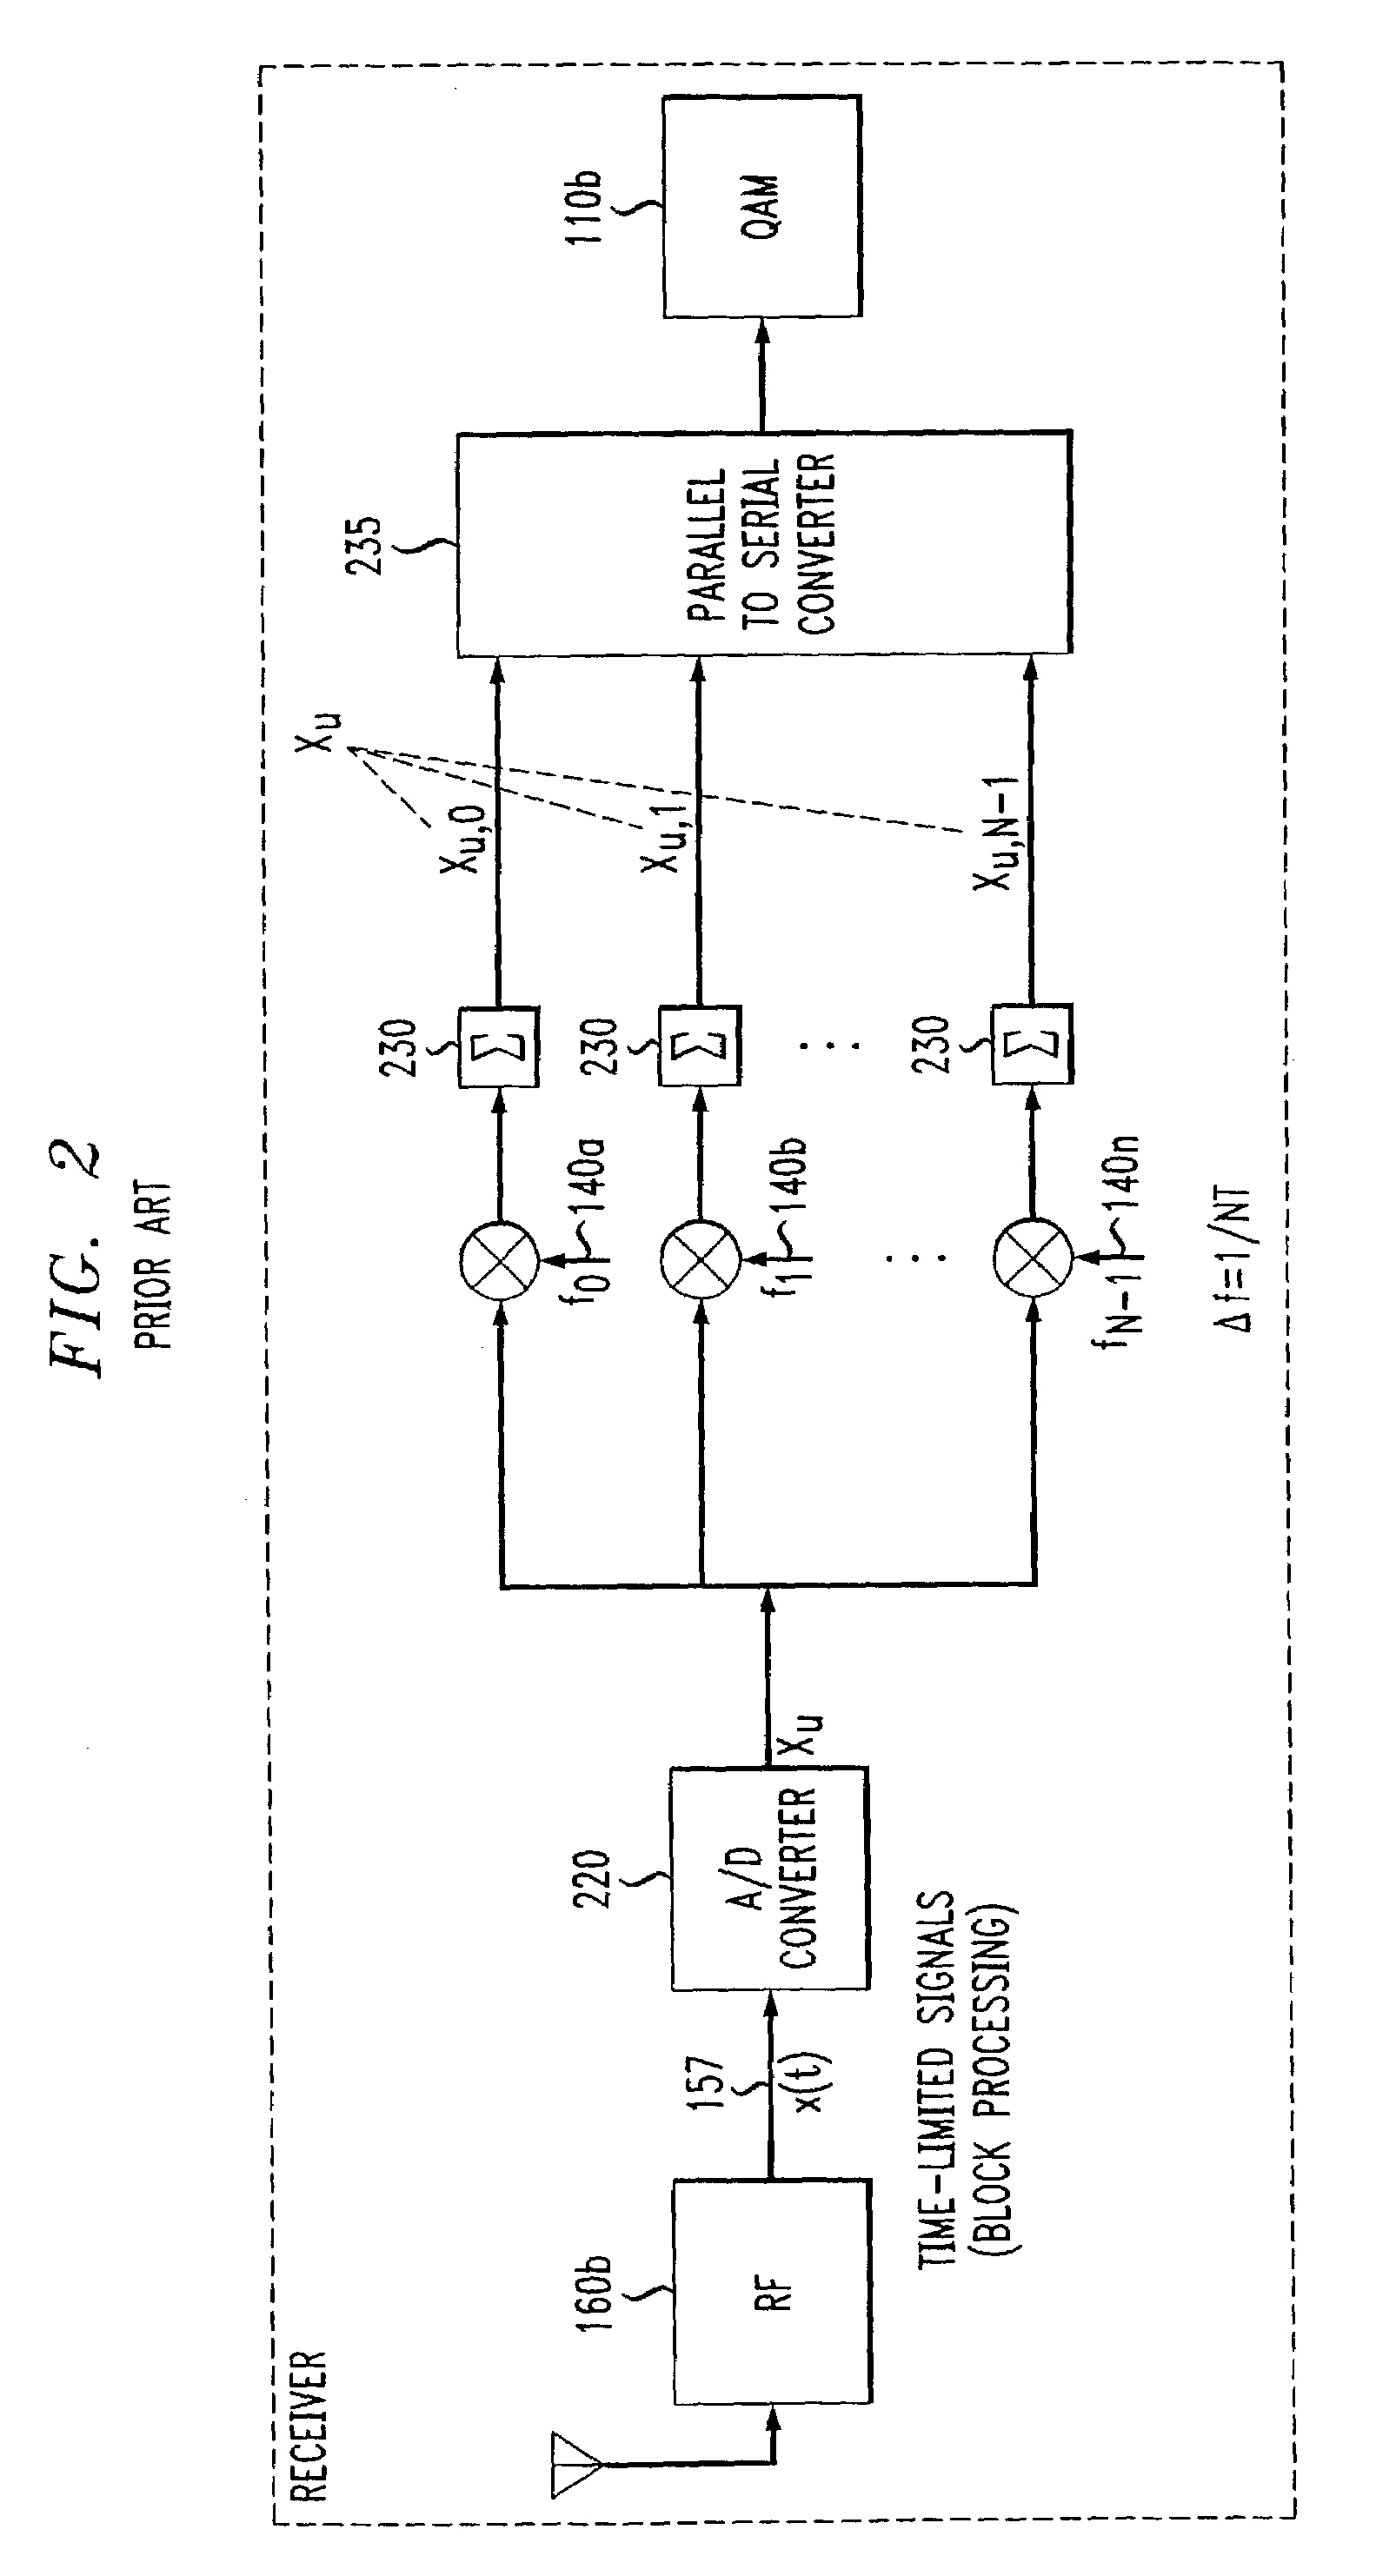 Method and system for reduction of peak-to-average power ratio of transmission signals comprising overlapping waveforms